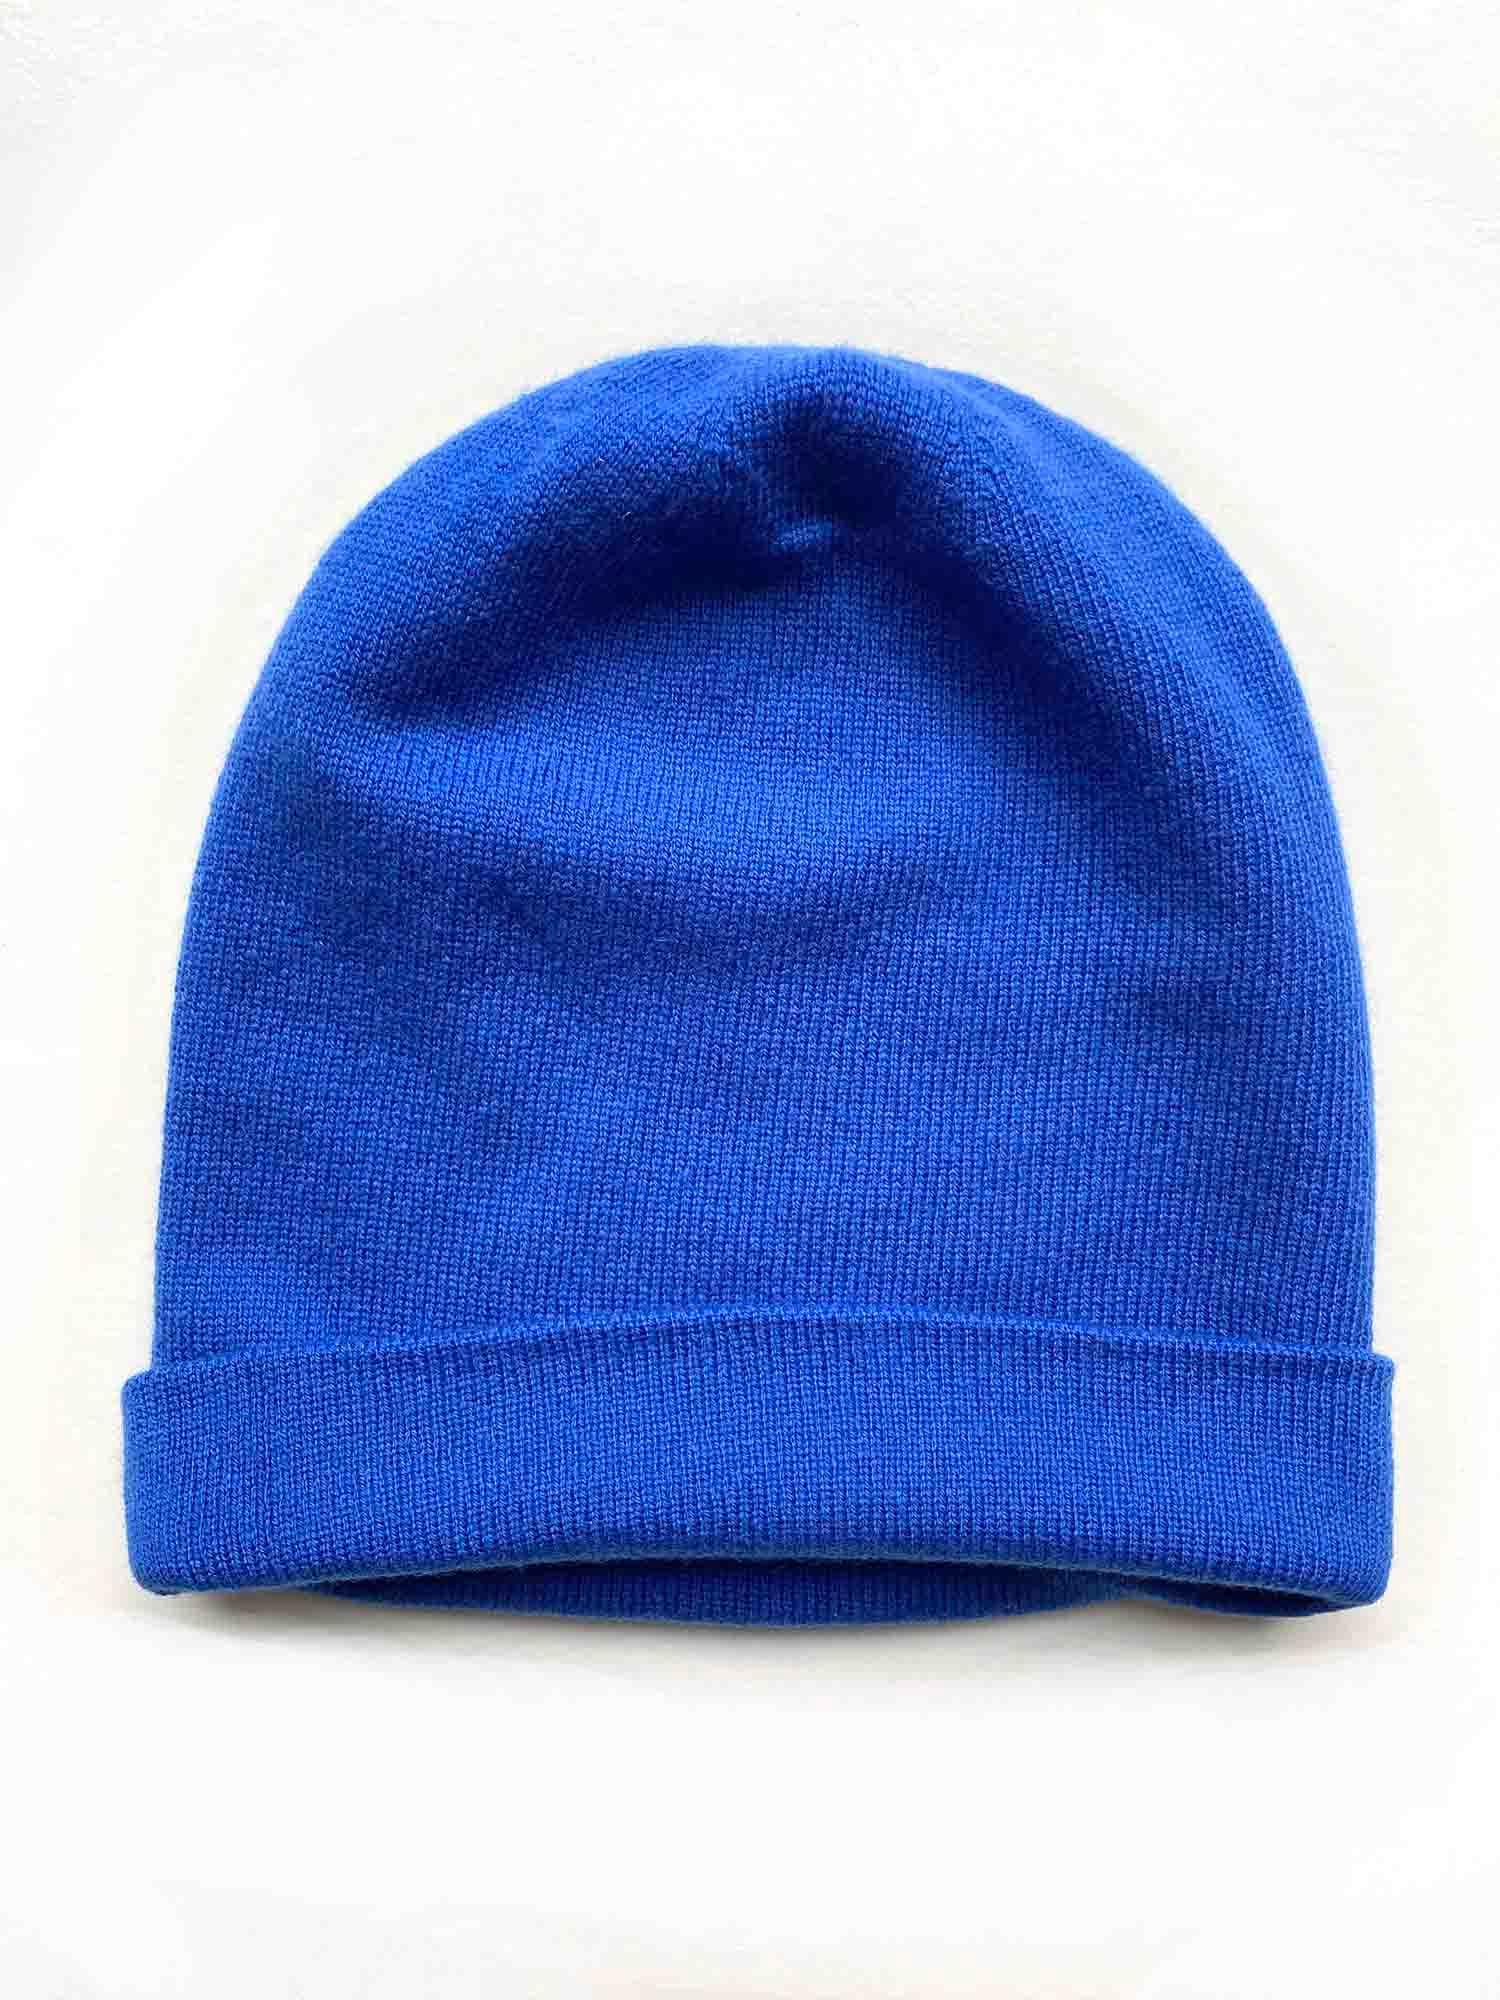 Bundle offer for cashmere hat and scarf in Royal blue - SEMON Cashmere